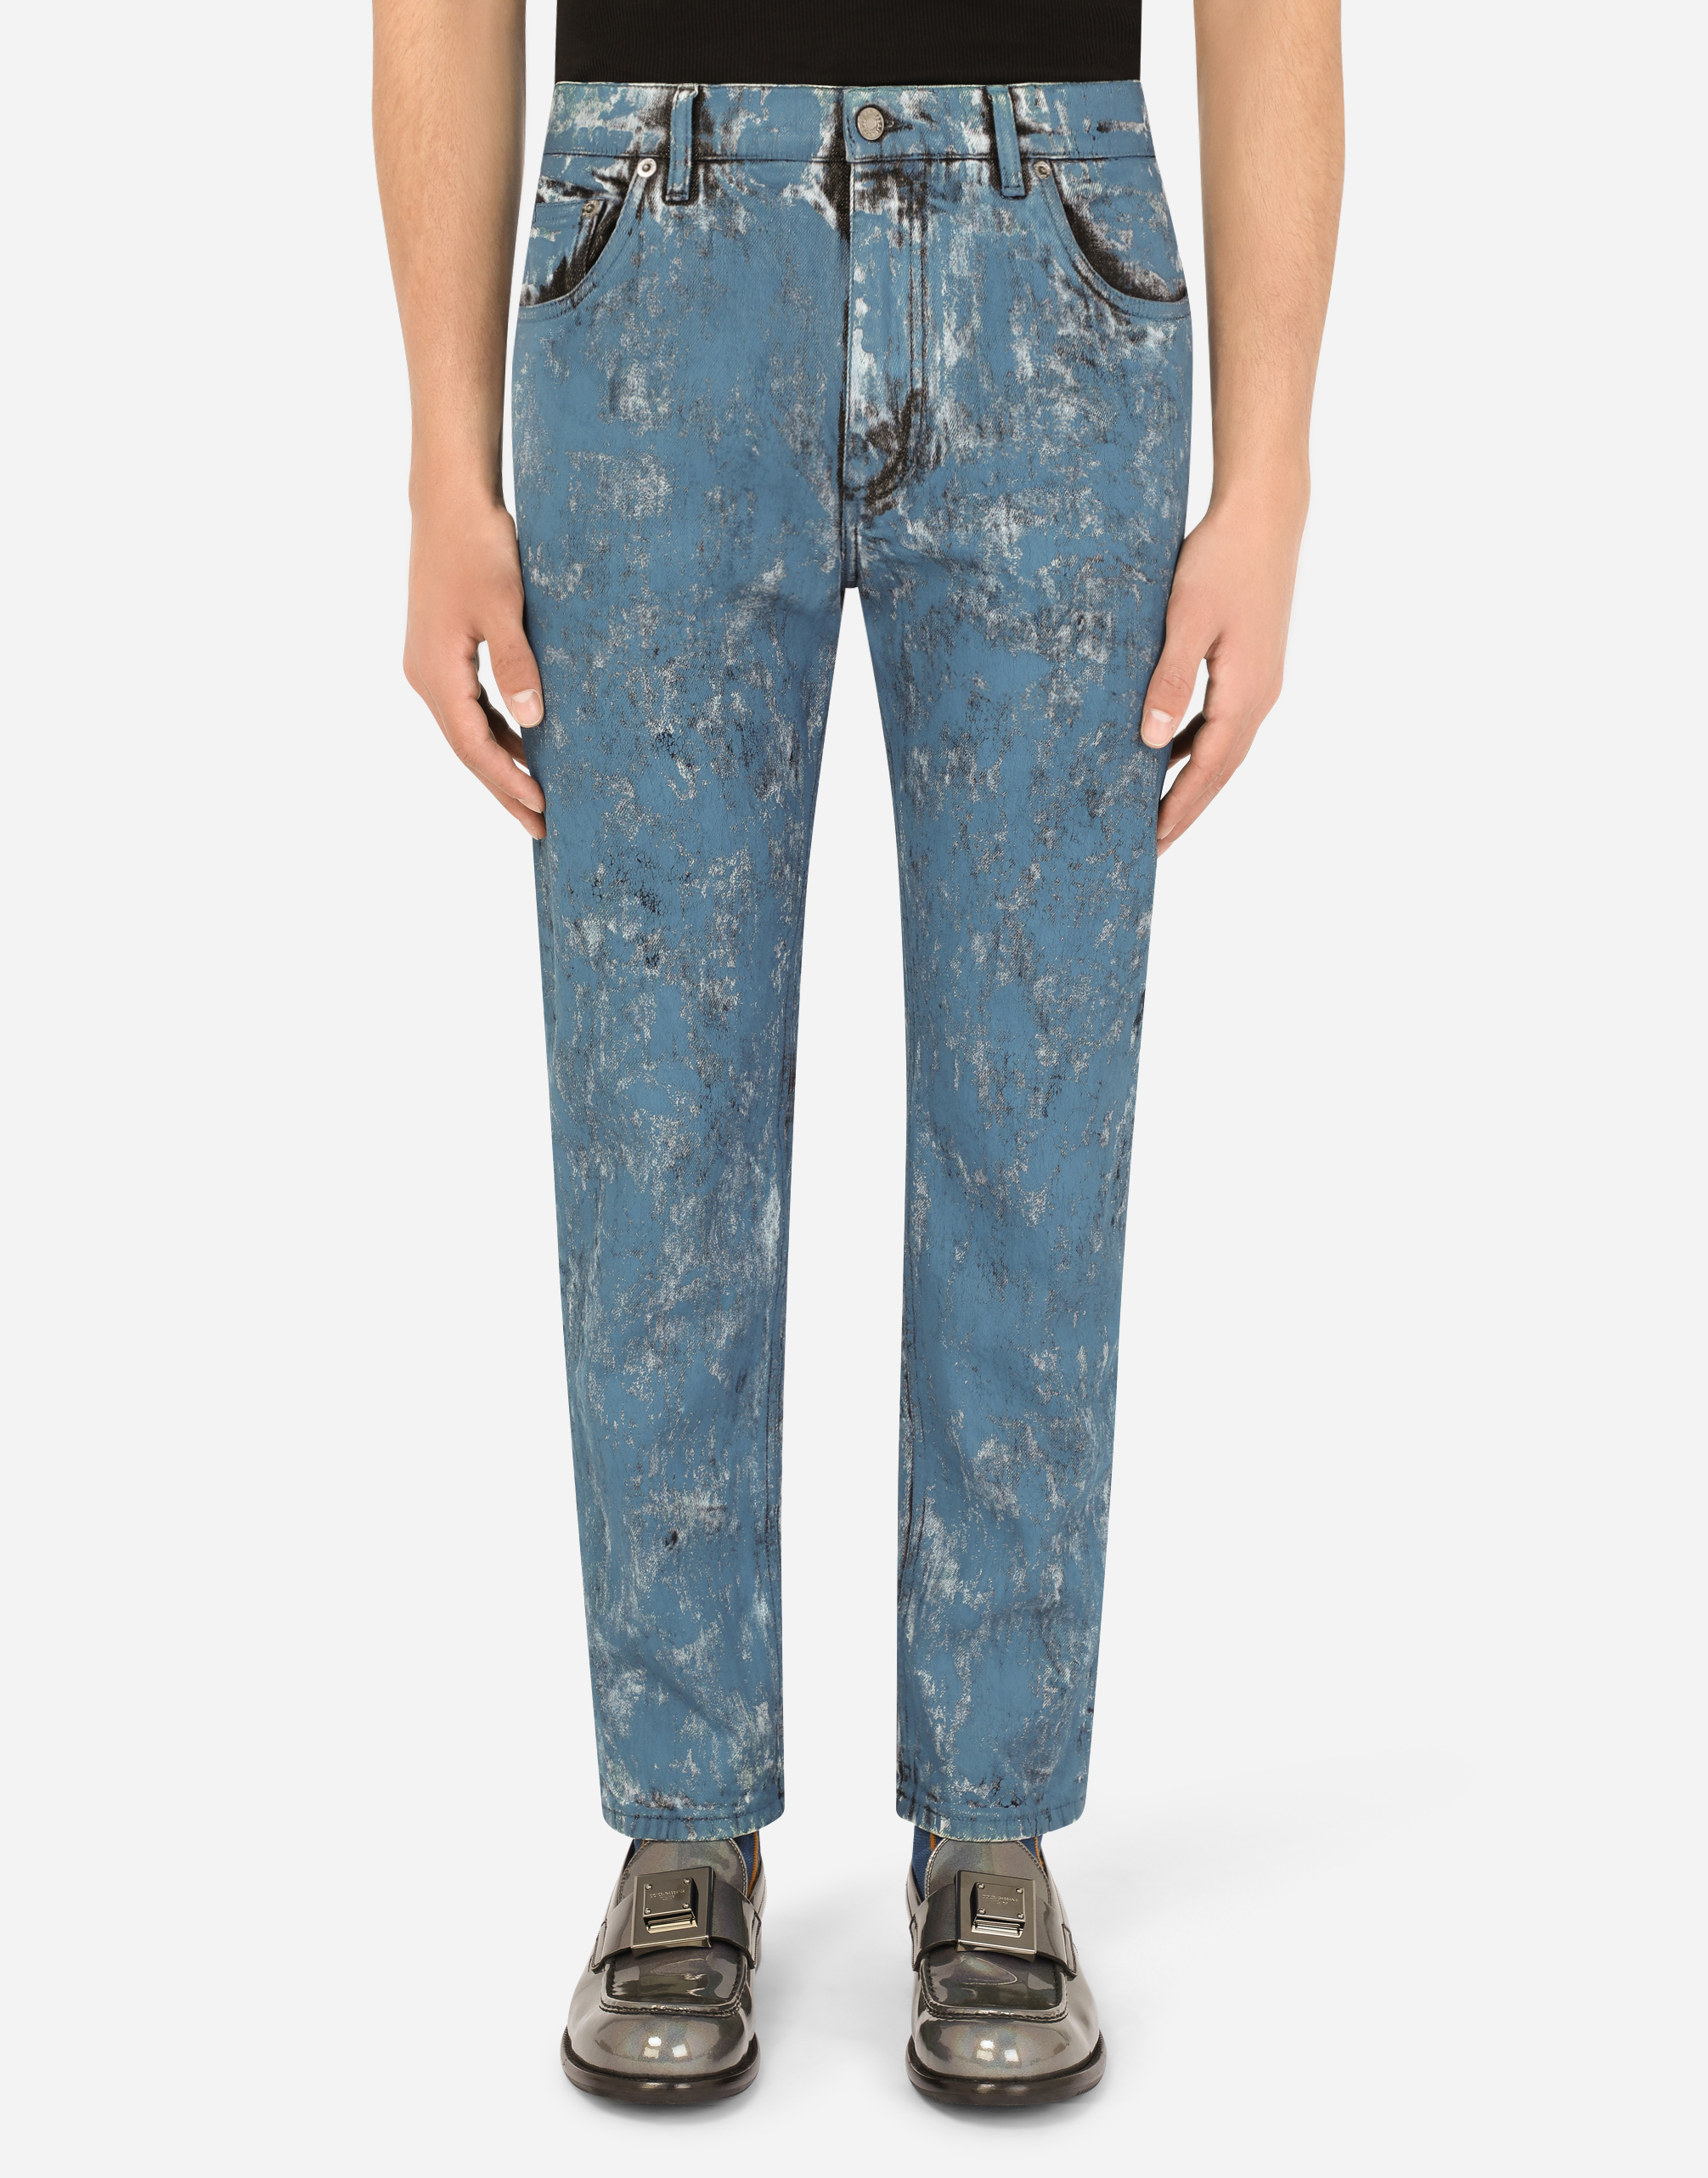 Loose blue jeans with marbled print in Multicolor